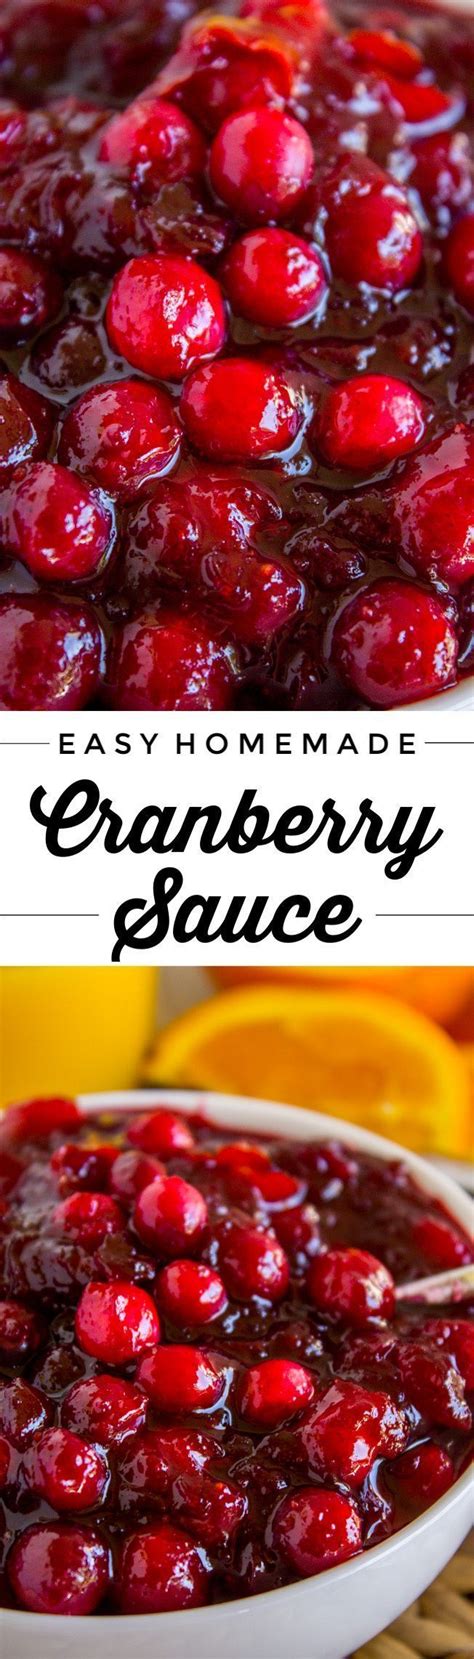 easy homemade cranberry sauce recipe from the food